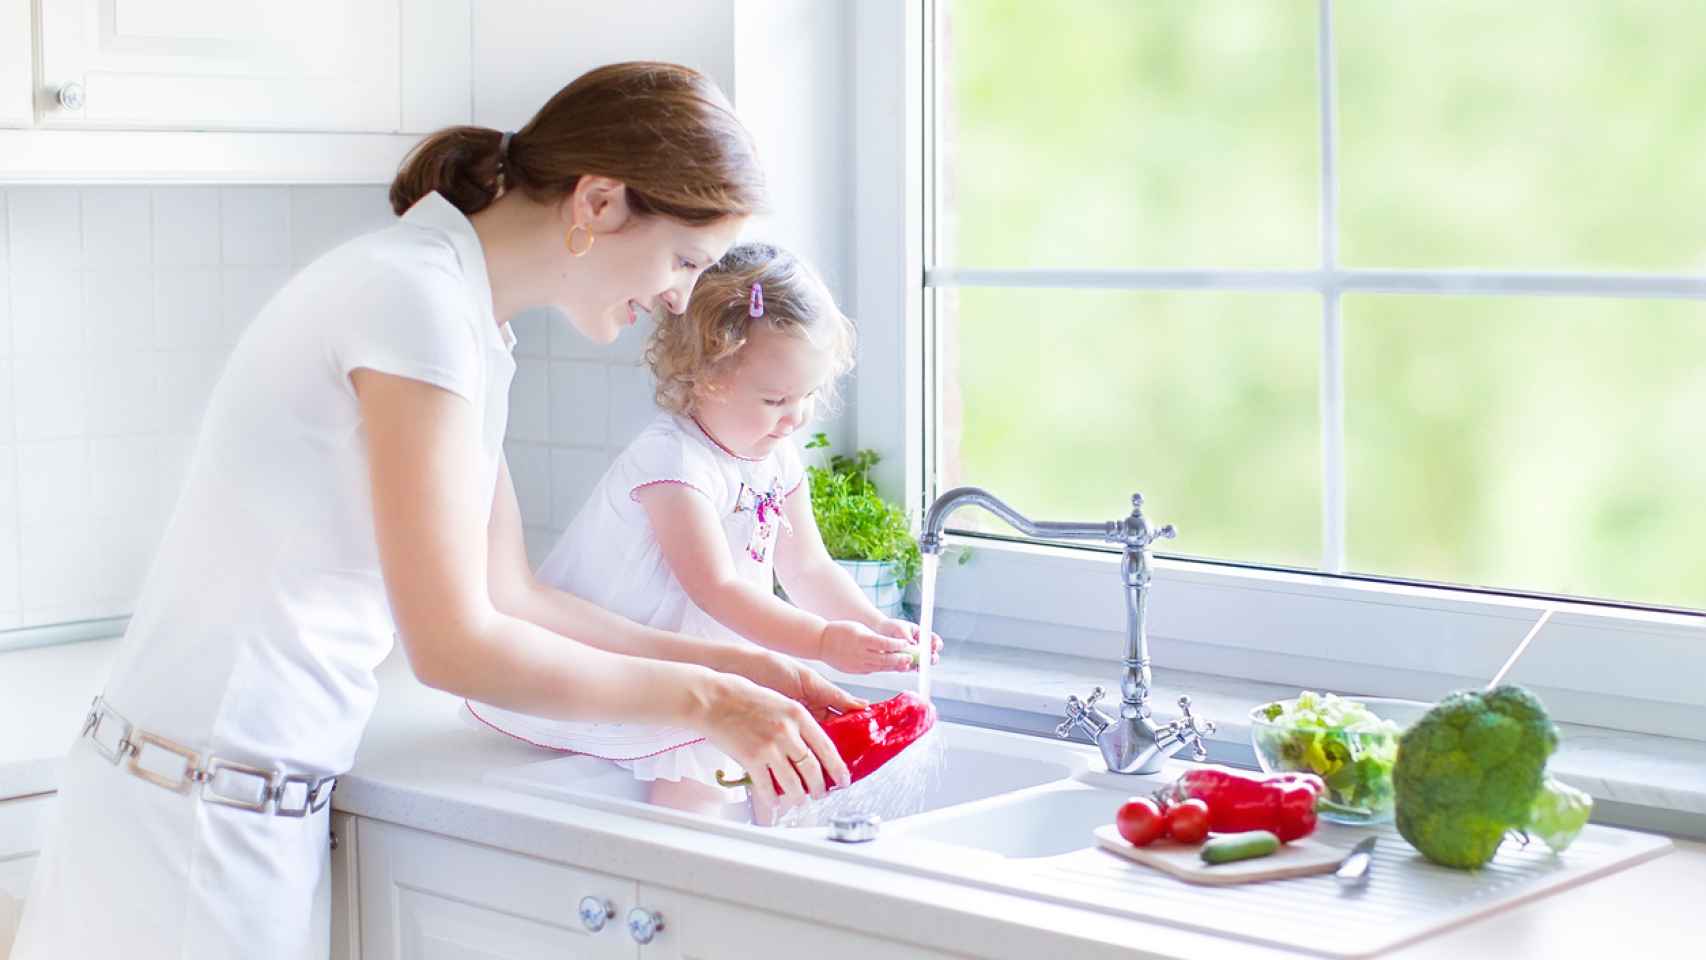 Beautiful mother and her daughter washing vegetables in kitchen sink